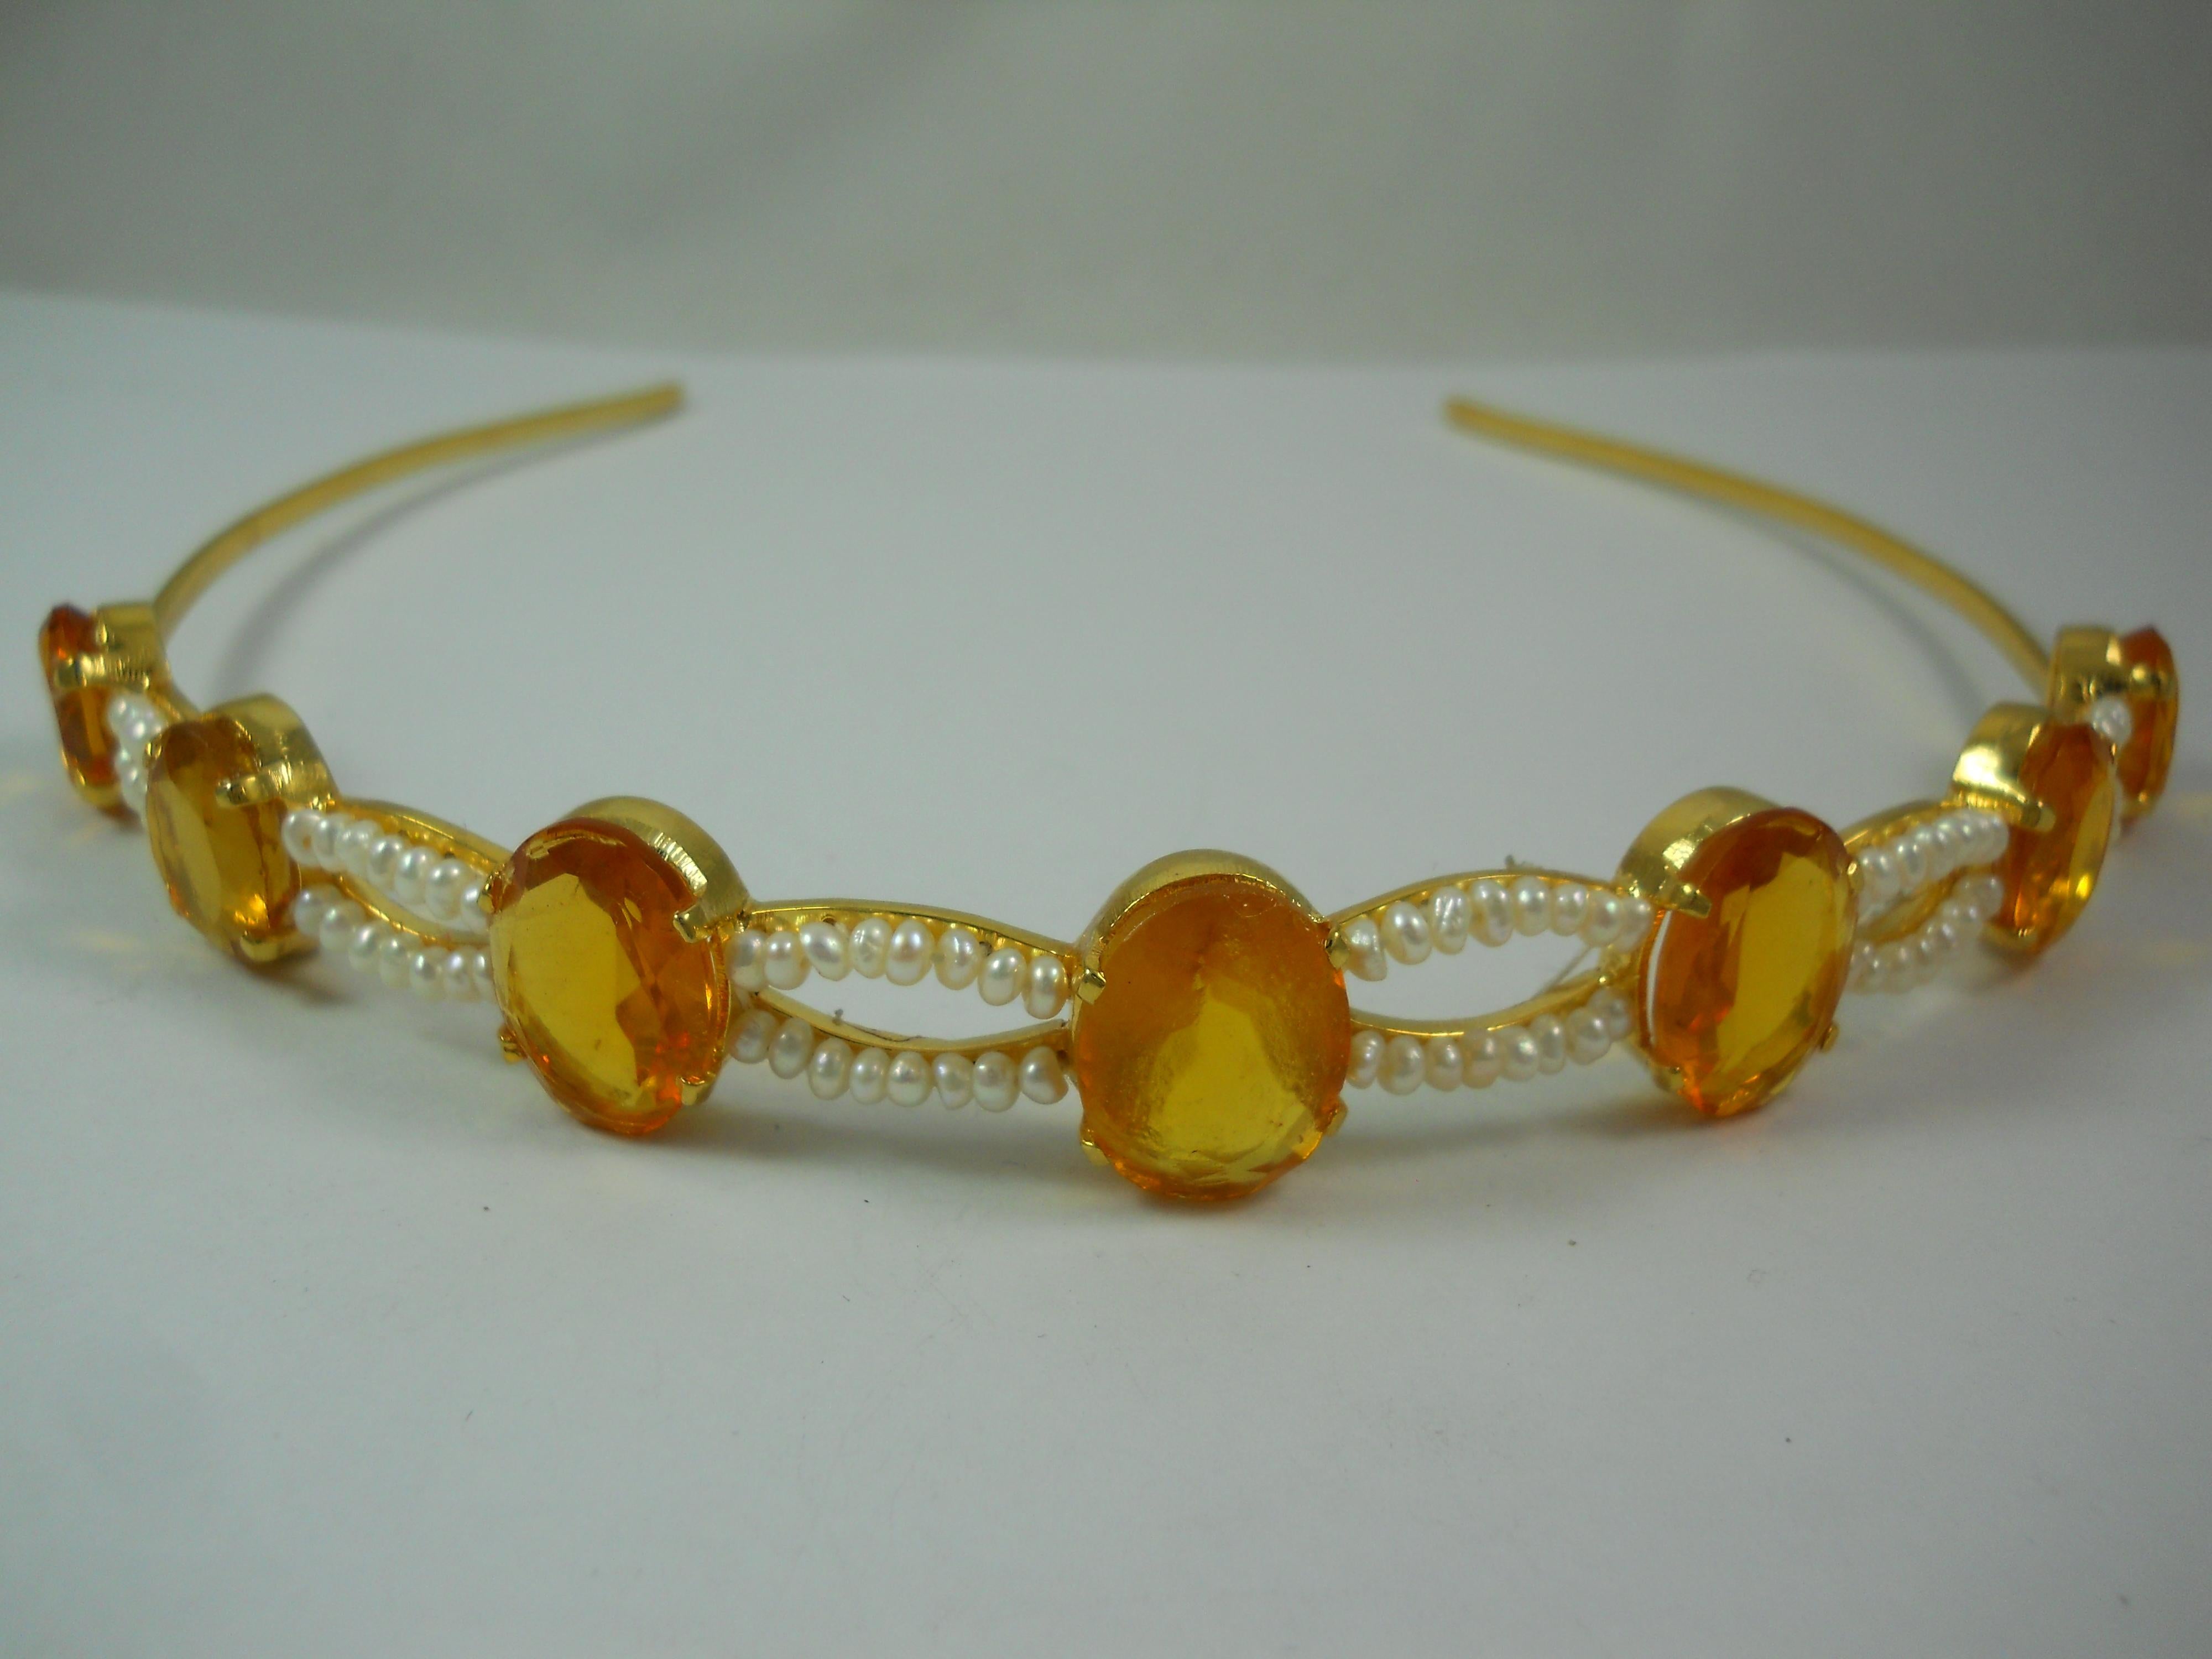 For the queen in you!
This stunning tiara is a symbol of beauty and self-love. It is handmade with Natural pearls and citrine in sterling silver with yellow gold plating. 

Gemstone type- Citrine
Gemstone origin- Natural 

Pearl- Fresh water